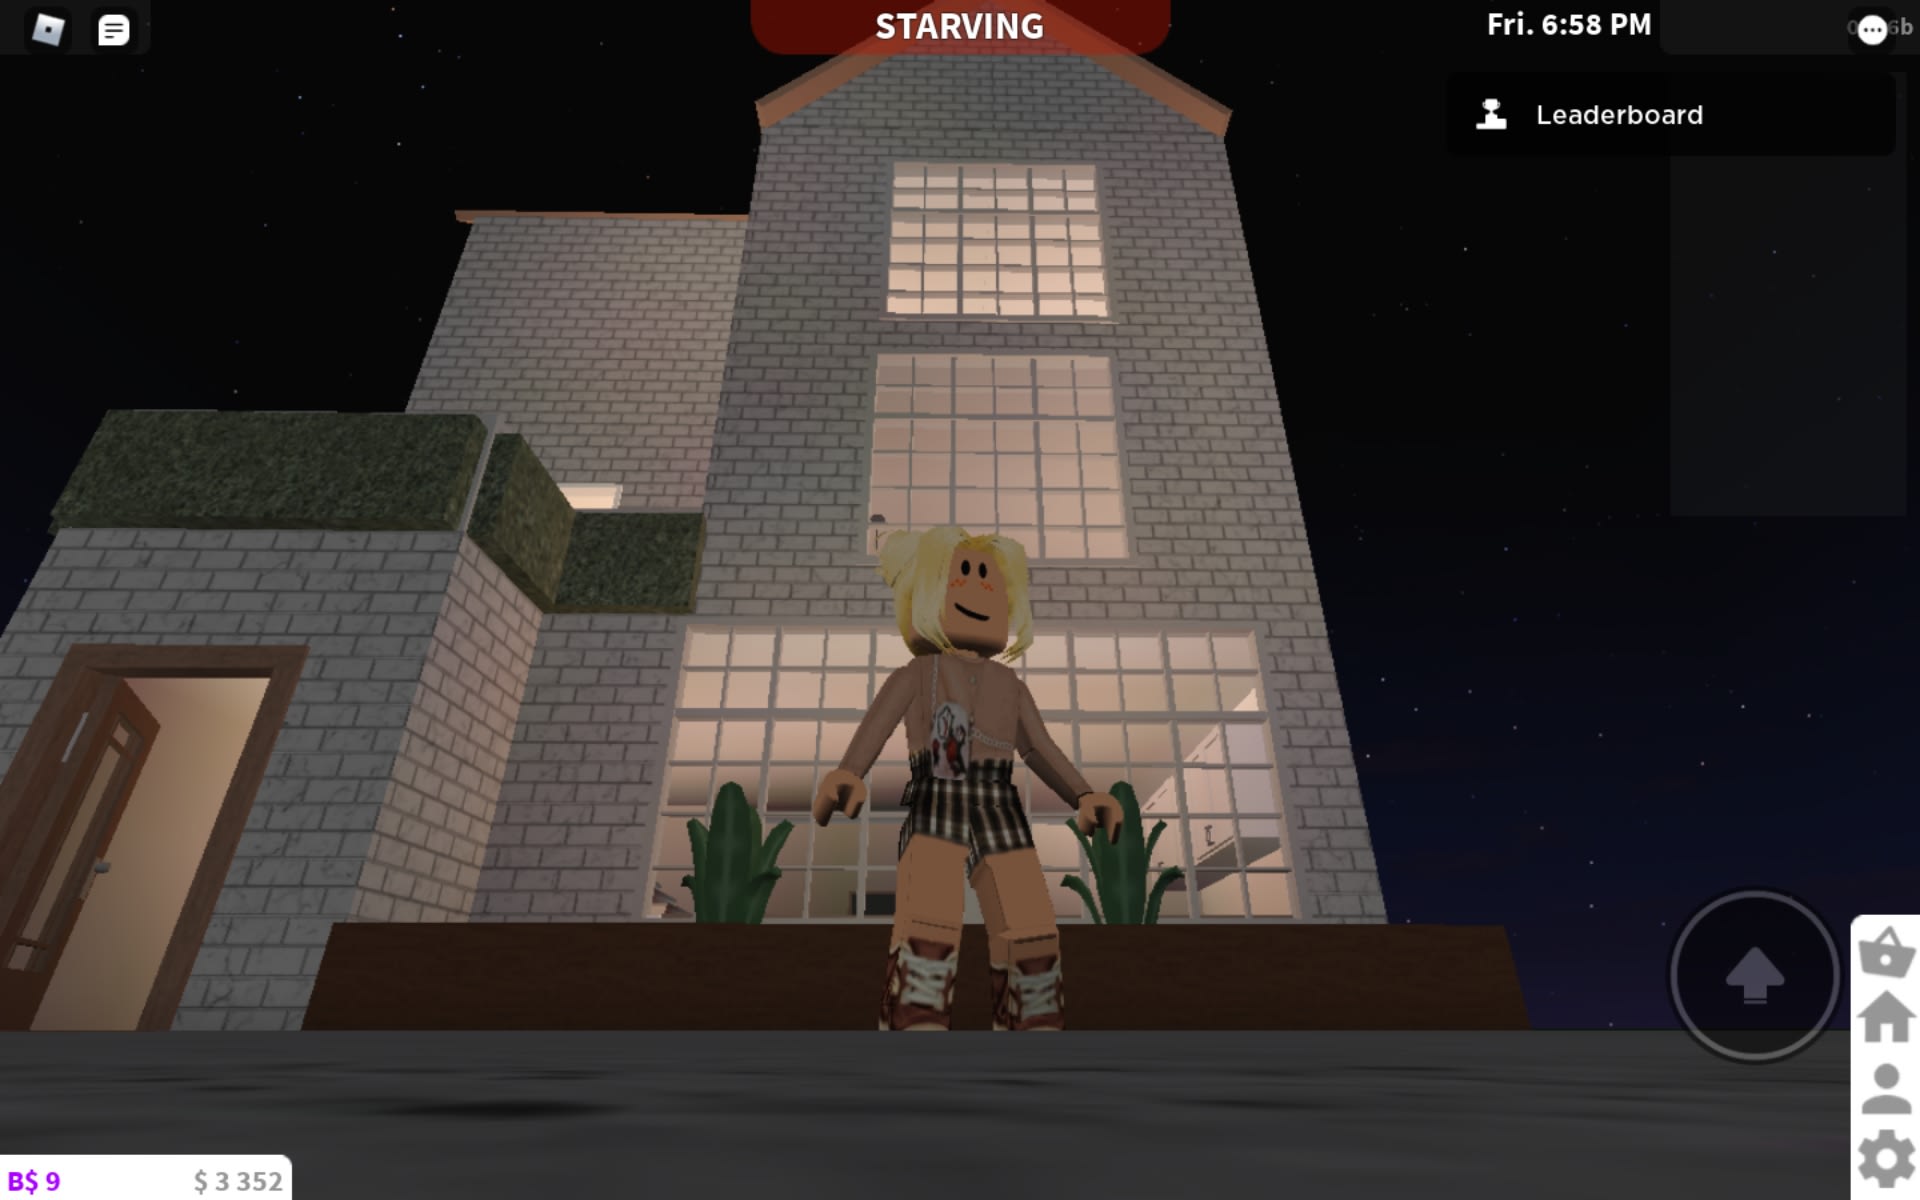 Building You A Bloxburg House Low Prices By Snowfox3528 - roblox bloxburg house build small